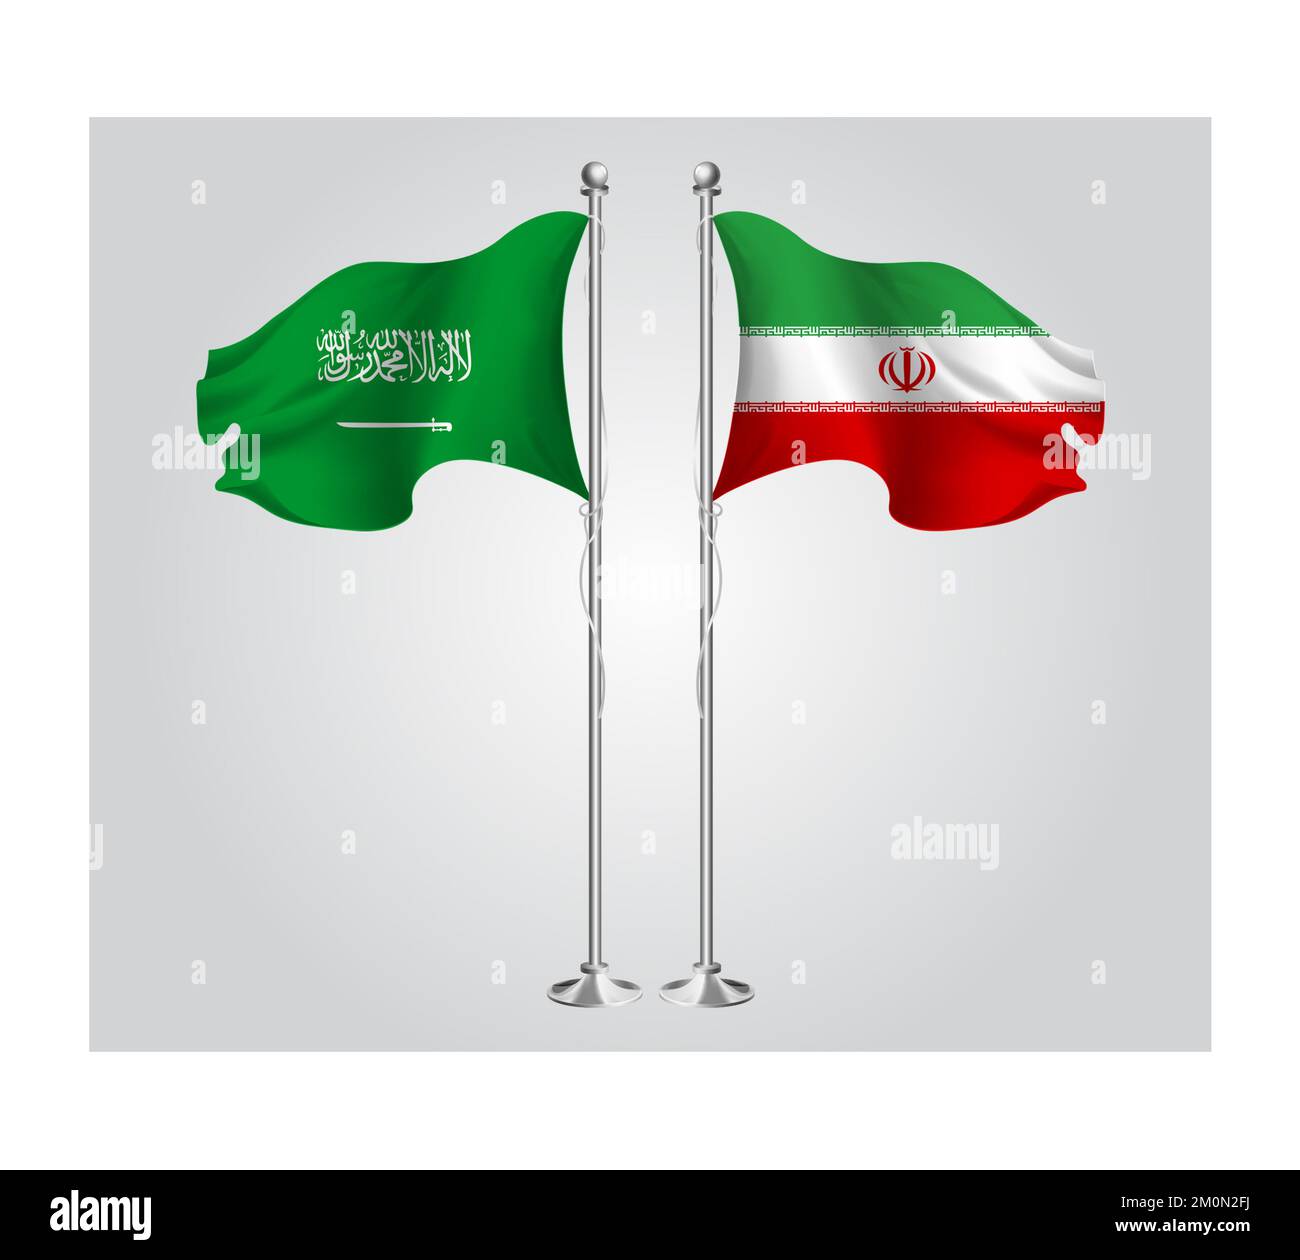 Saudi Arabi National flag for Friendship, cooperation and business deals Stock Photo